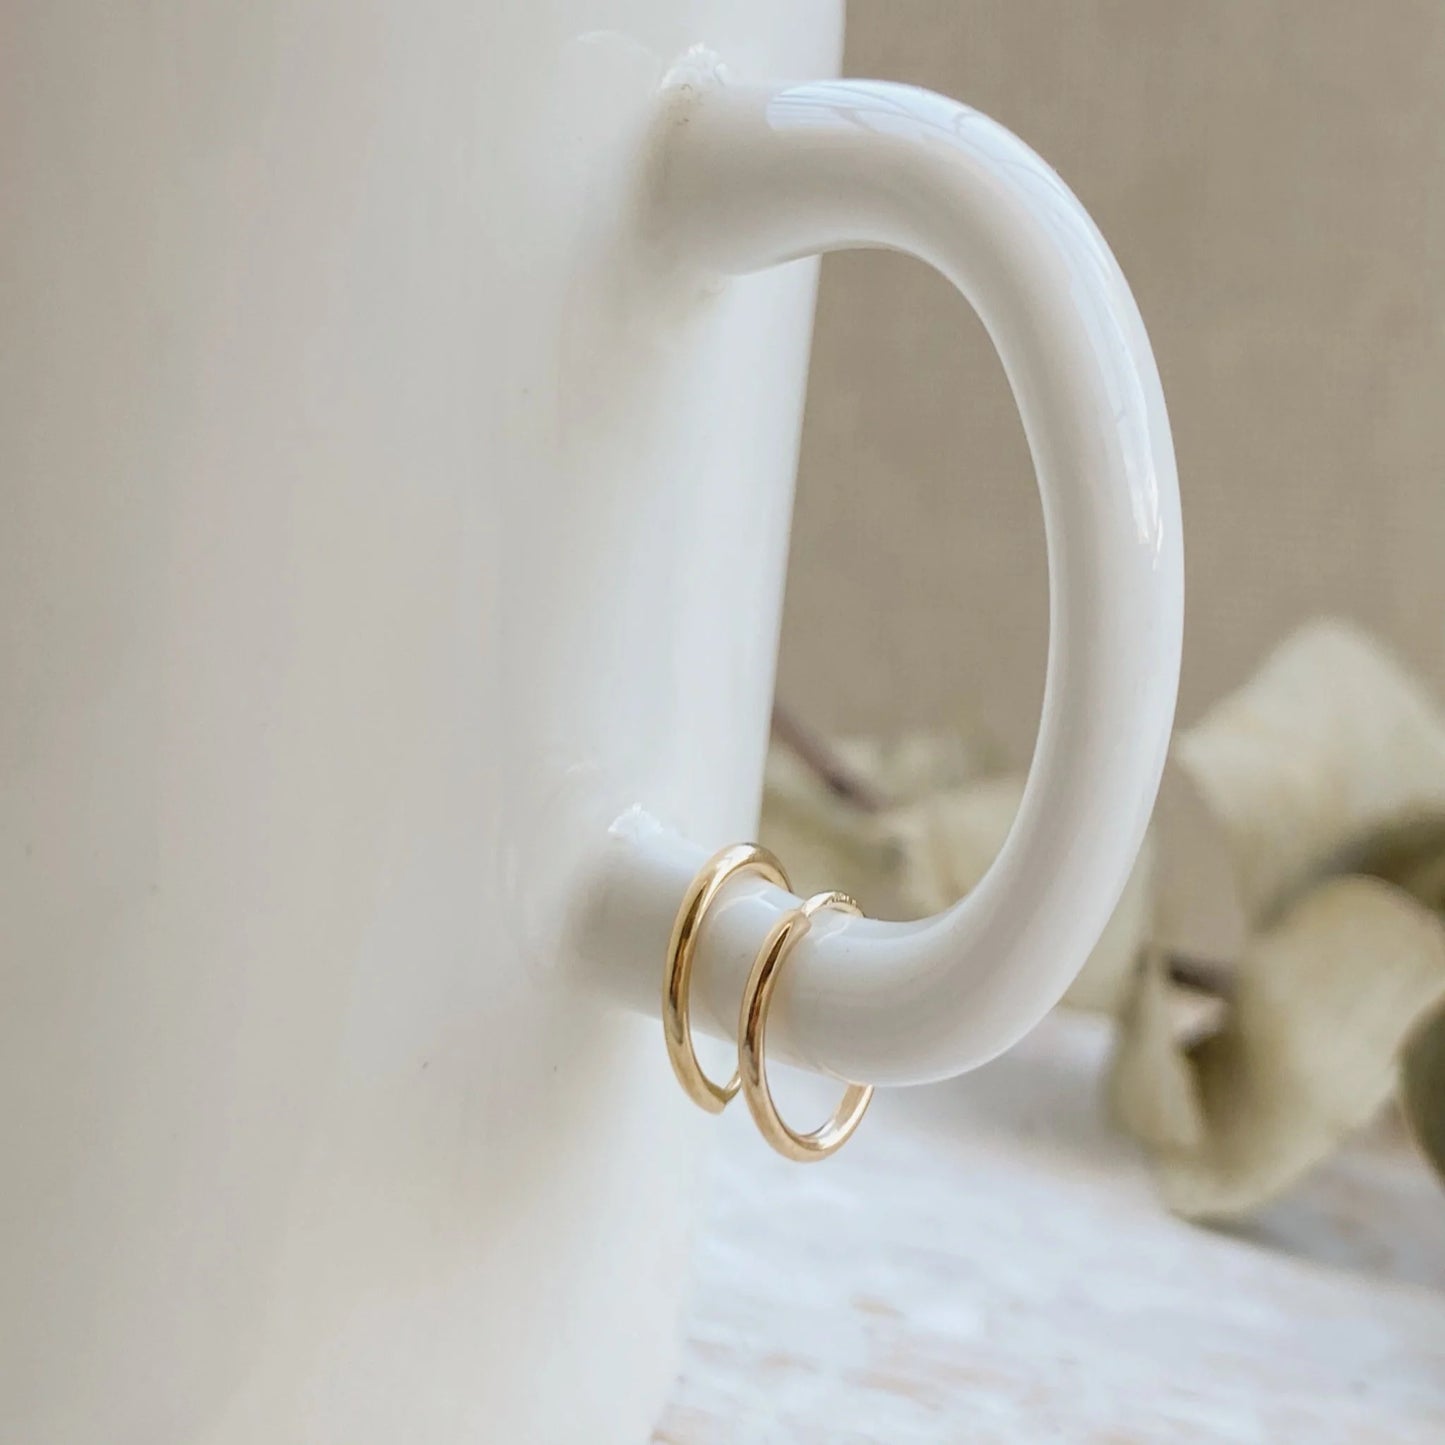 Load image into Gallery viewer, Huggie Hoop Earrings are the perfect huggie hoops that are made to look great and comfortable while you wear them. Hoops like these will make your ears look dainty and cute, yet classy and elegant all at once!
